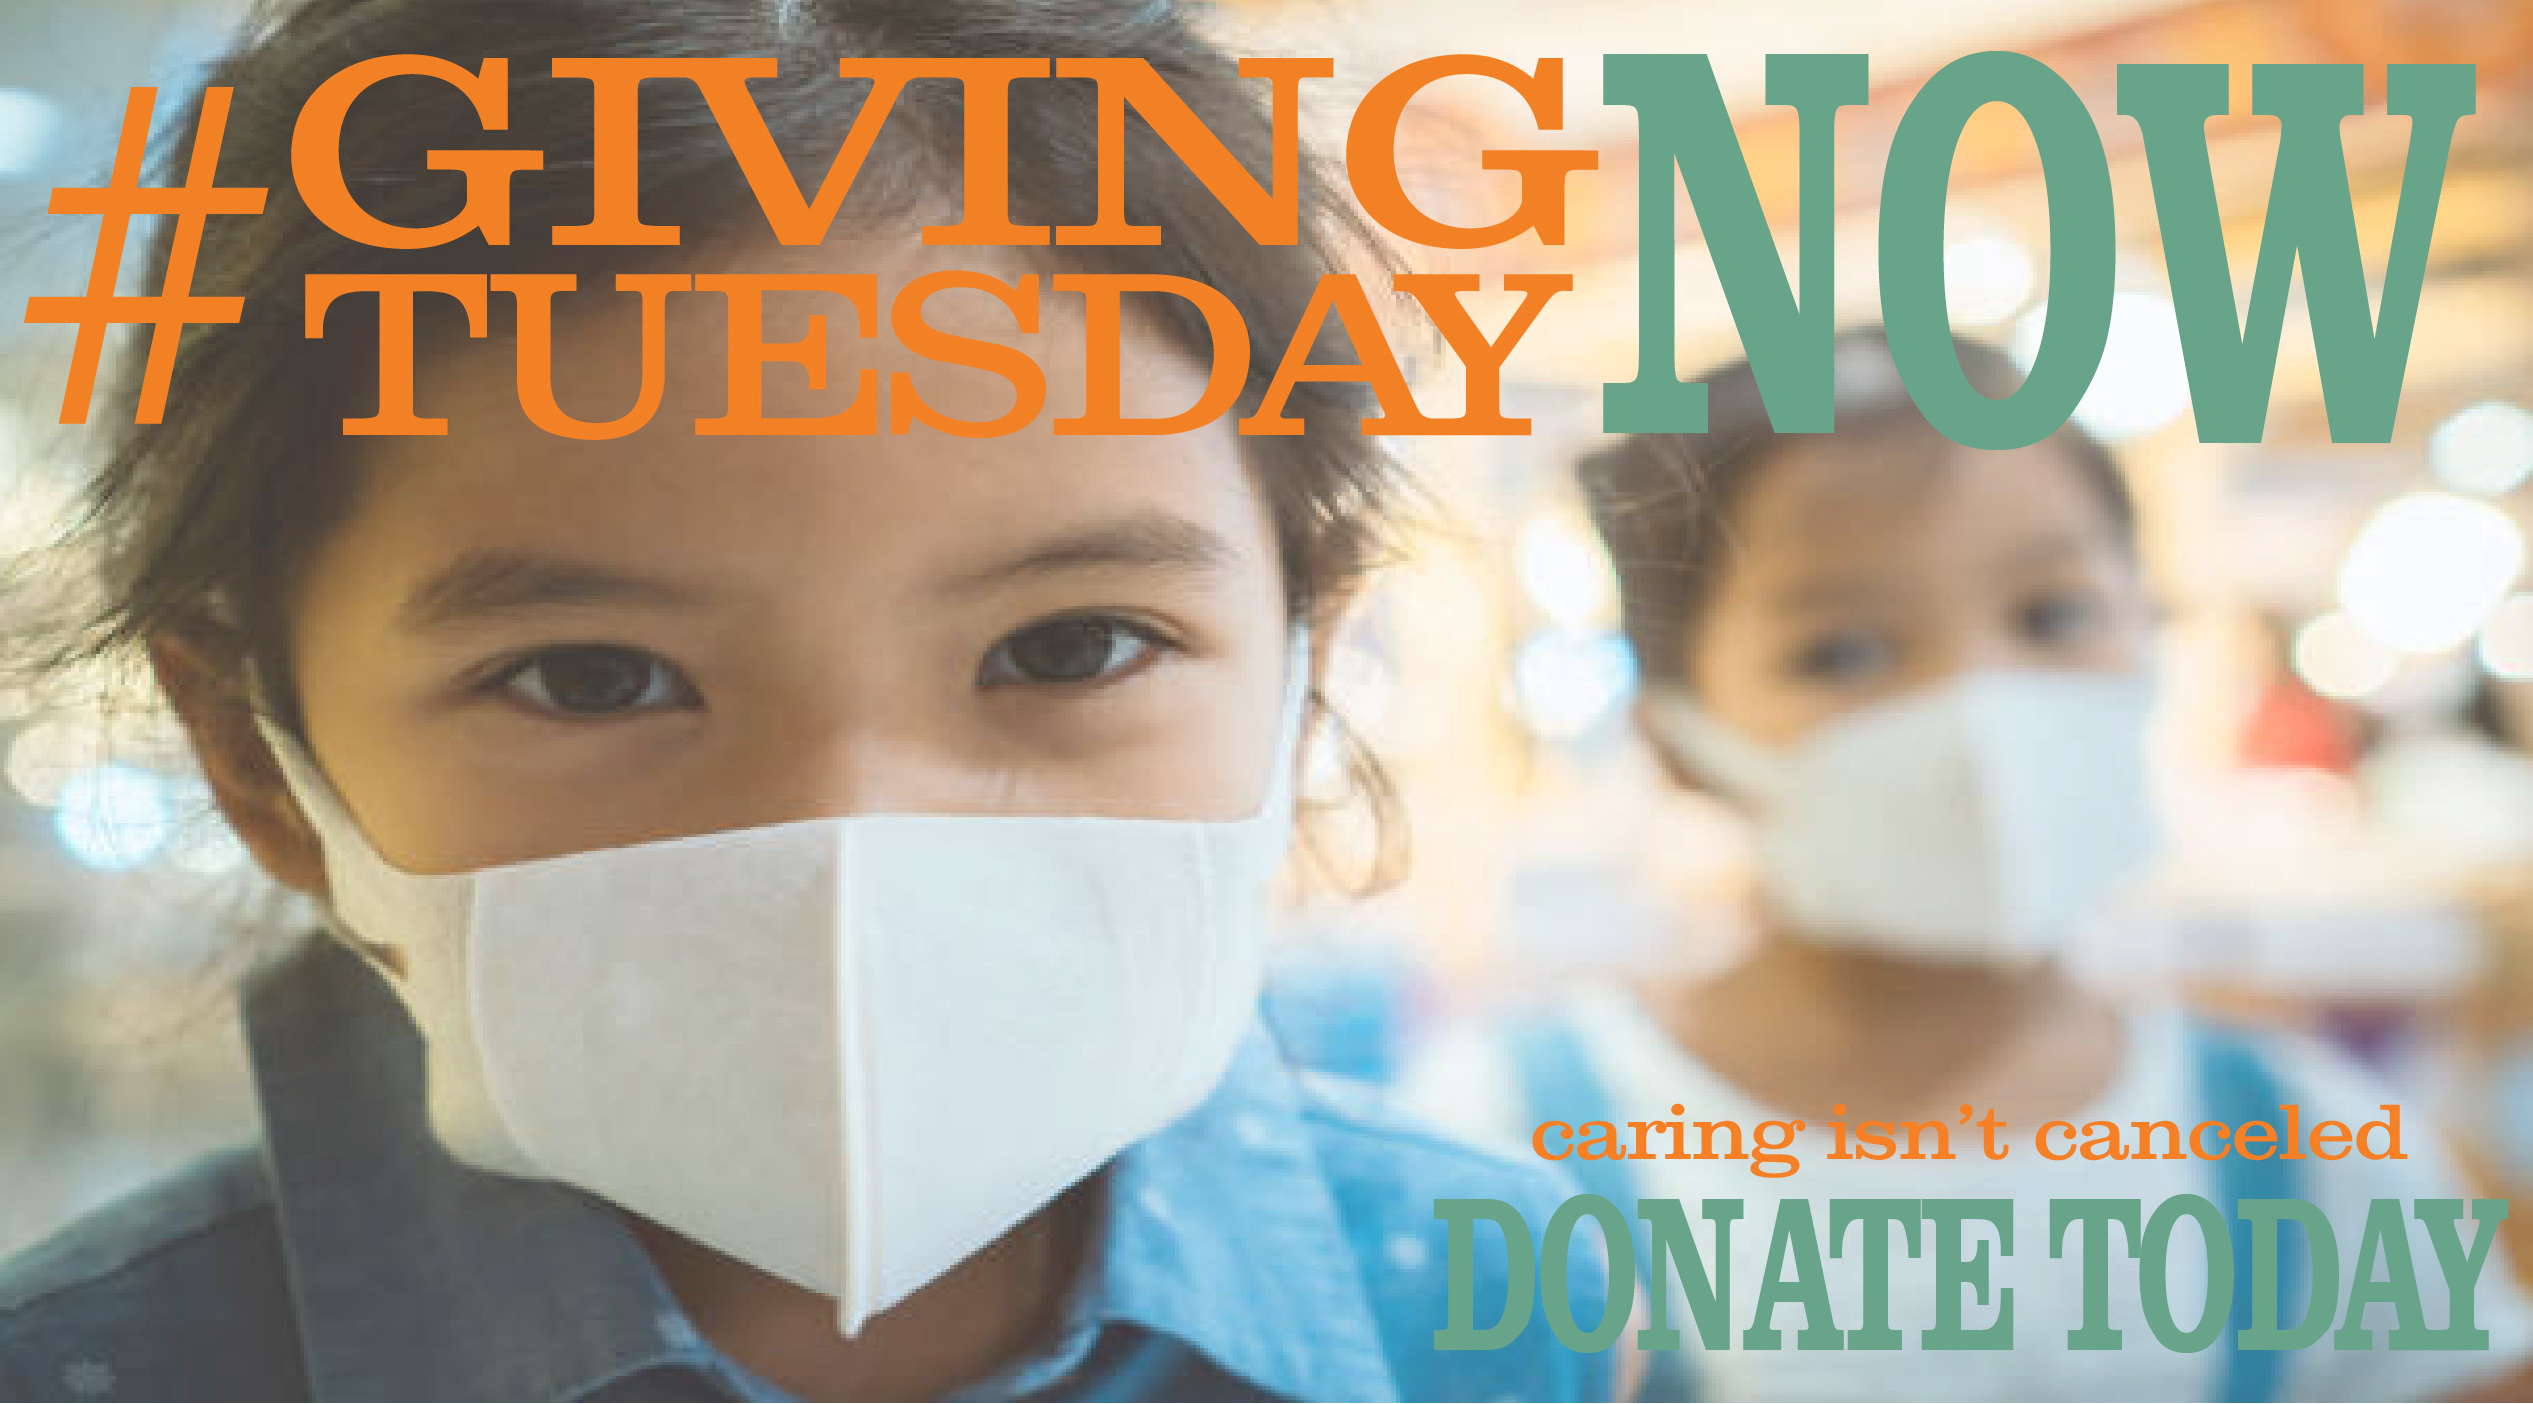 An image of two children with face masks and text that reads #GivingTuesdayNow and caring isn't canceled donate today at Five Acres